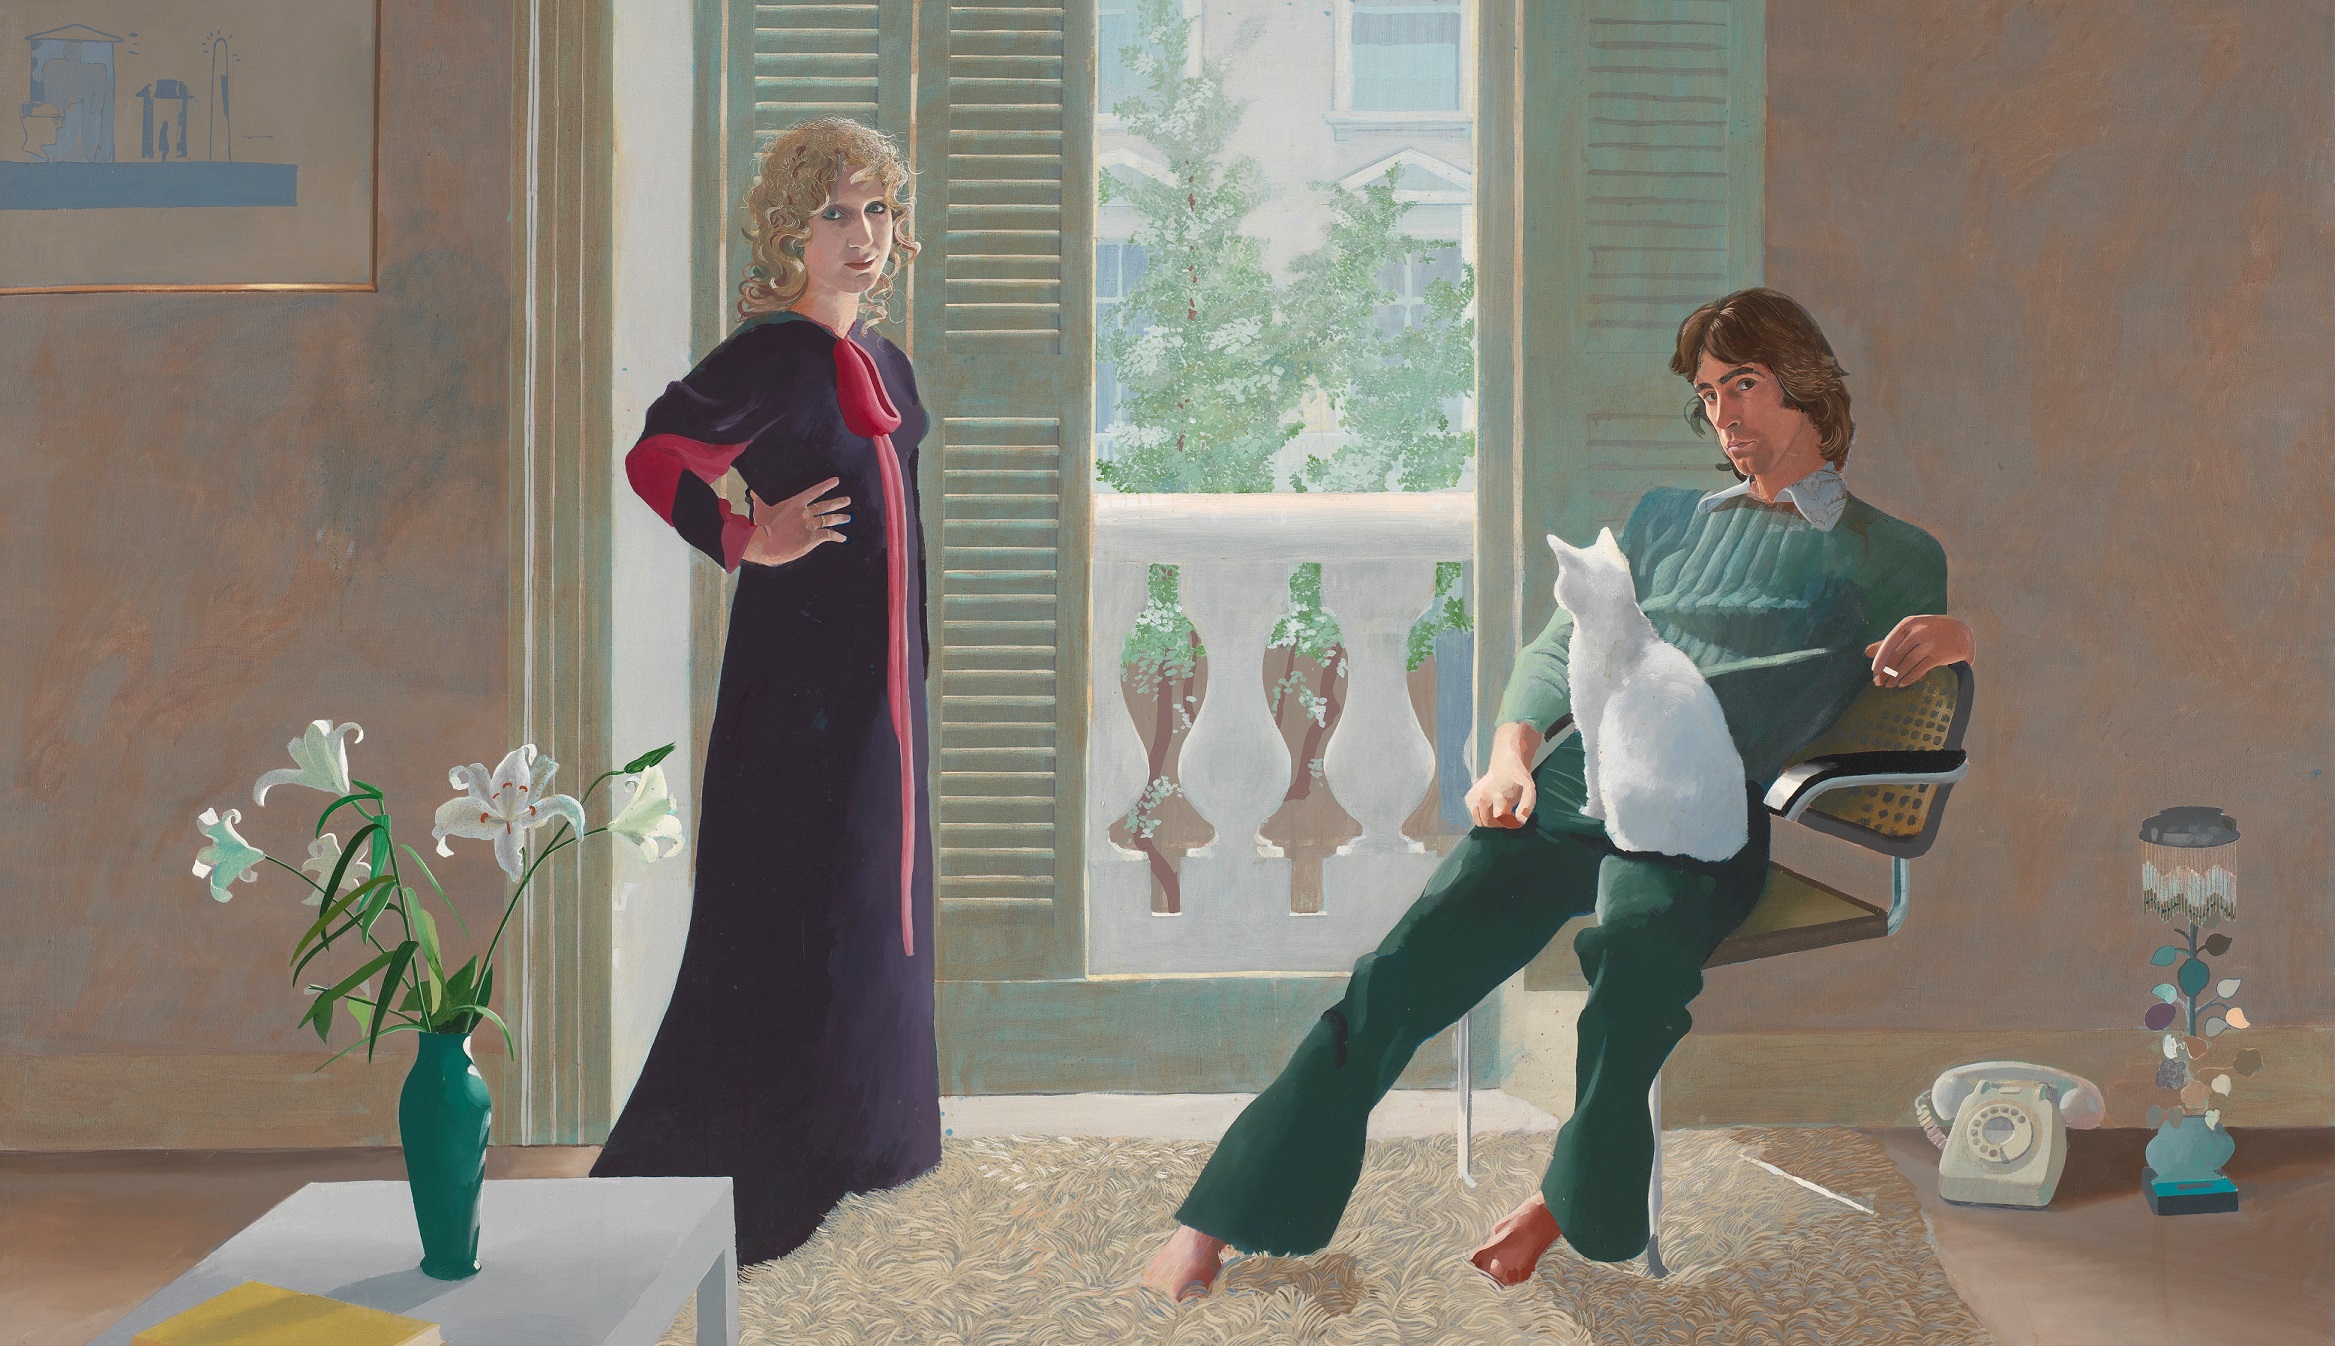 David Hockney’s ‘Mr and Mrs Clark and Percy’, 1970-1971